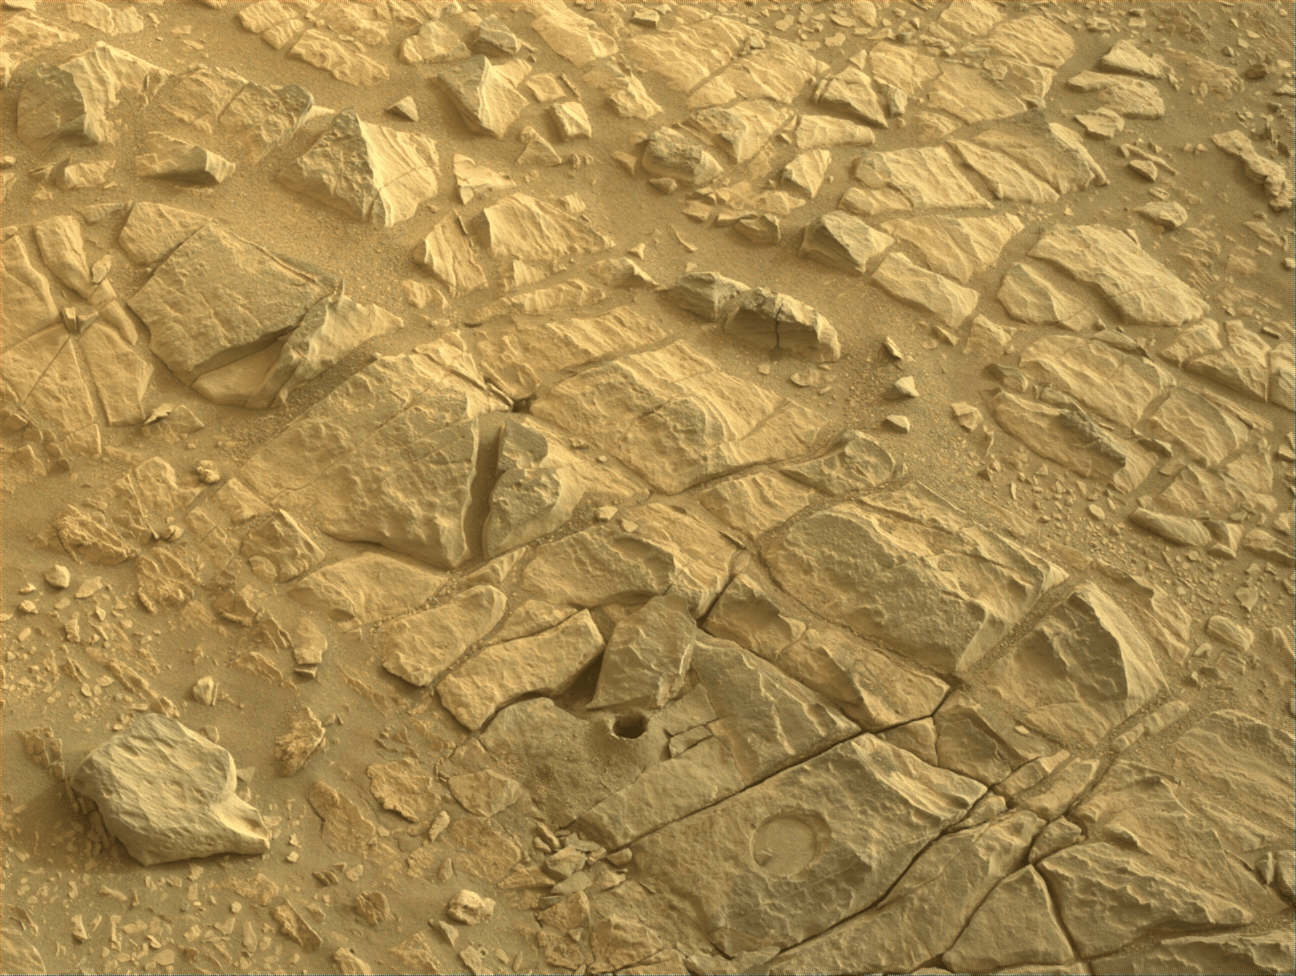 Image taken was taken by the Mars Perseverance rover after collecting the rock sample 14 at Shuyak. Nearby the drill hole of the sample collection is an abrasion patch to the bottom right.